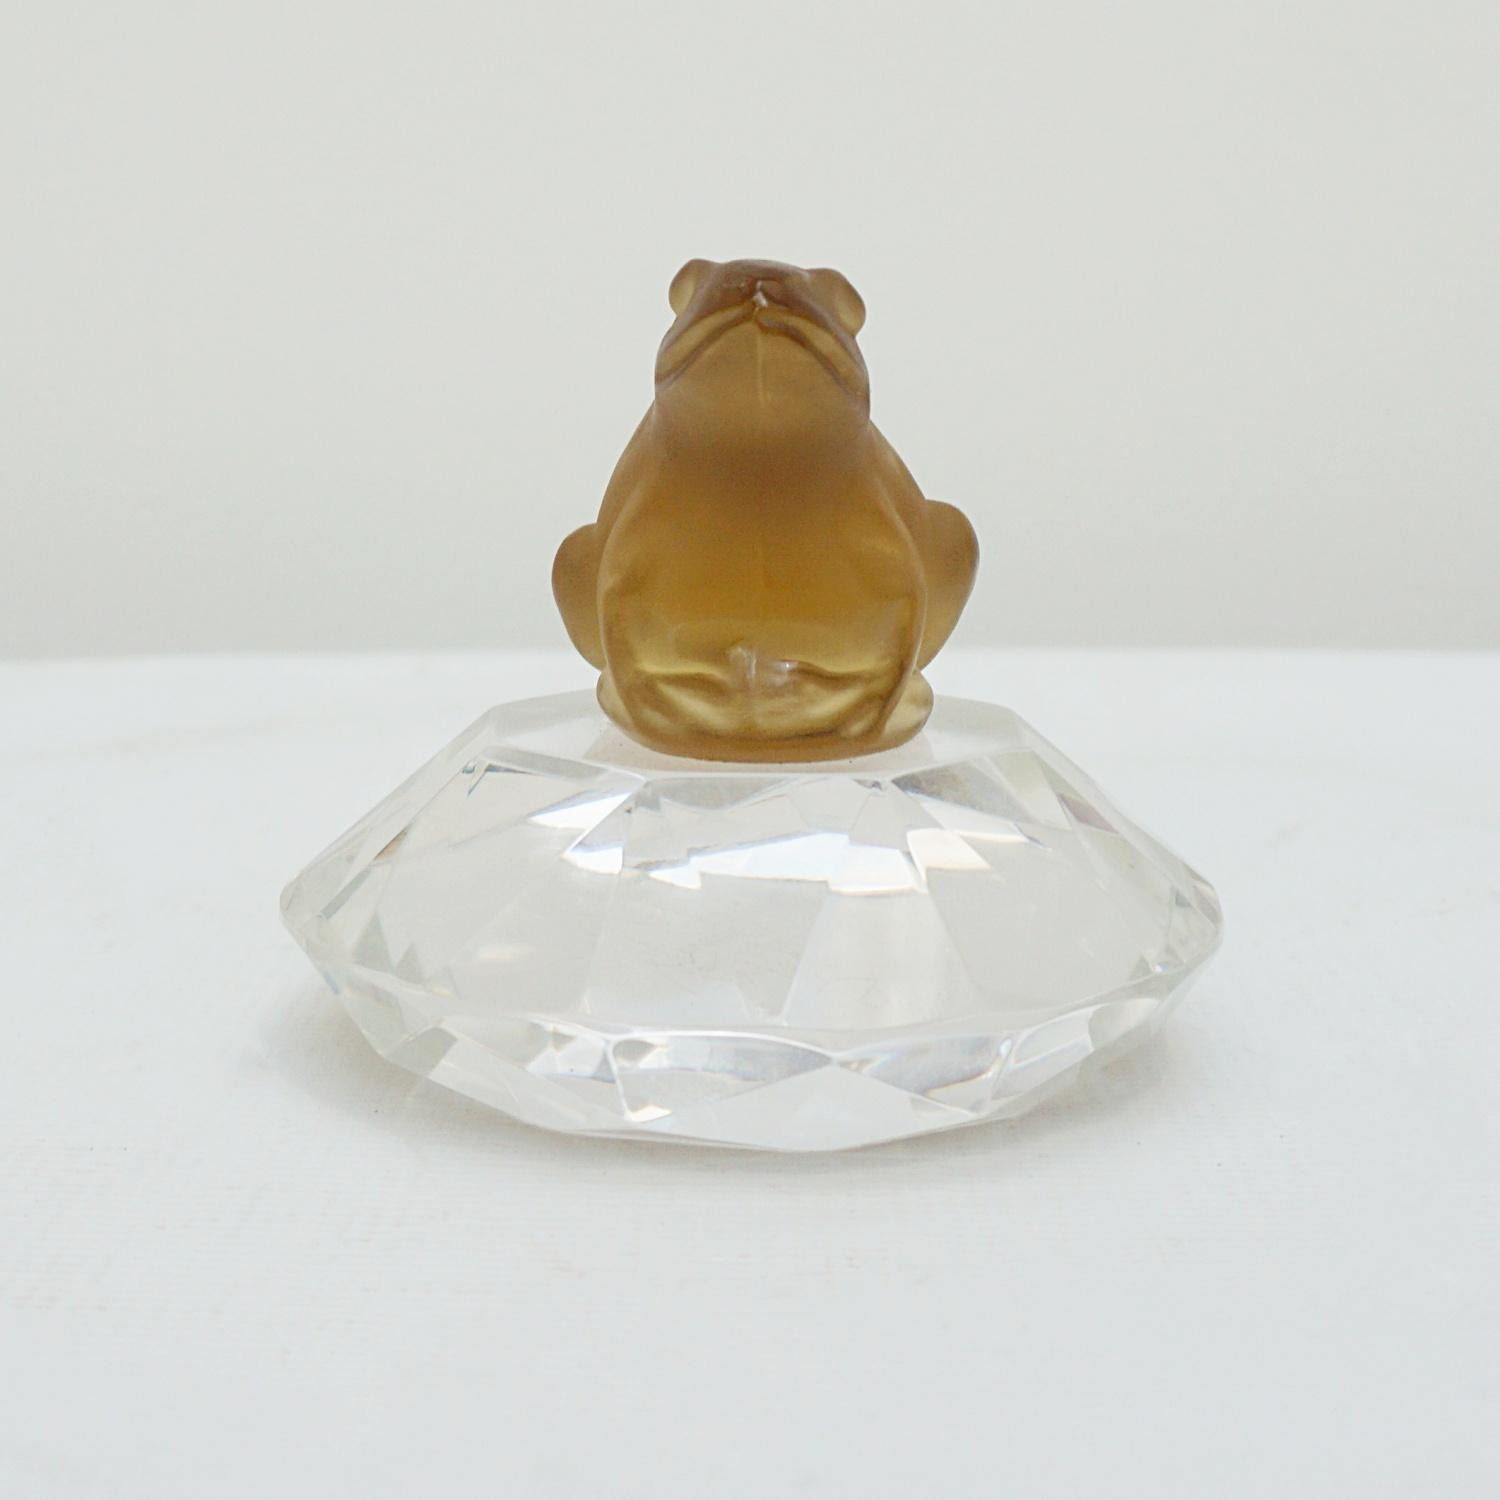 A mid-century paperweight. Coloured glass frog perched on a clear glass base.

Dimensions: H 8cm D 10cm

Origin: Czech

Date: Circa 1950

Item Number: 2710224

 